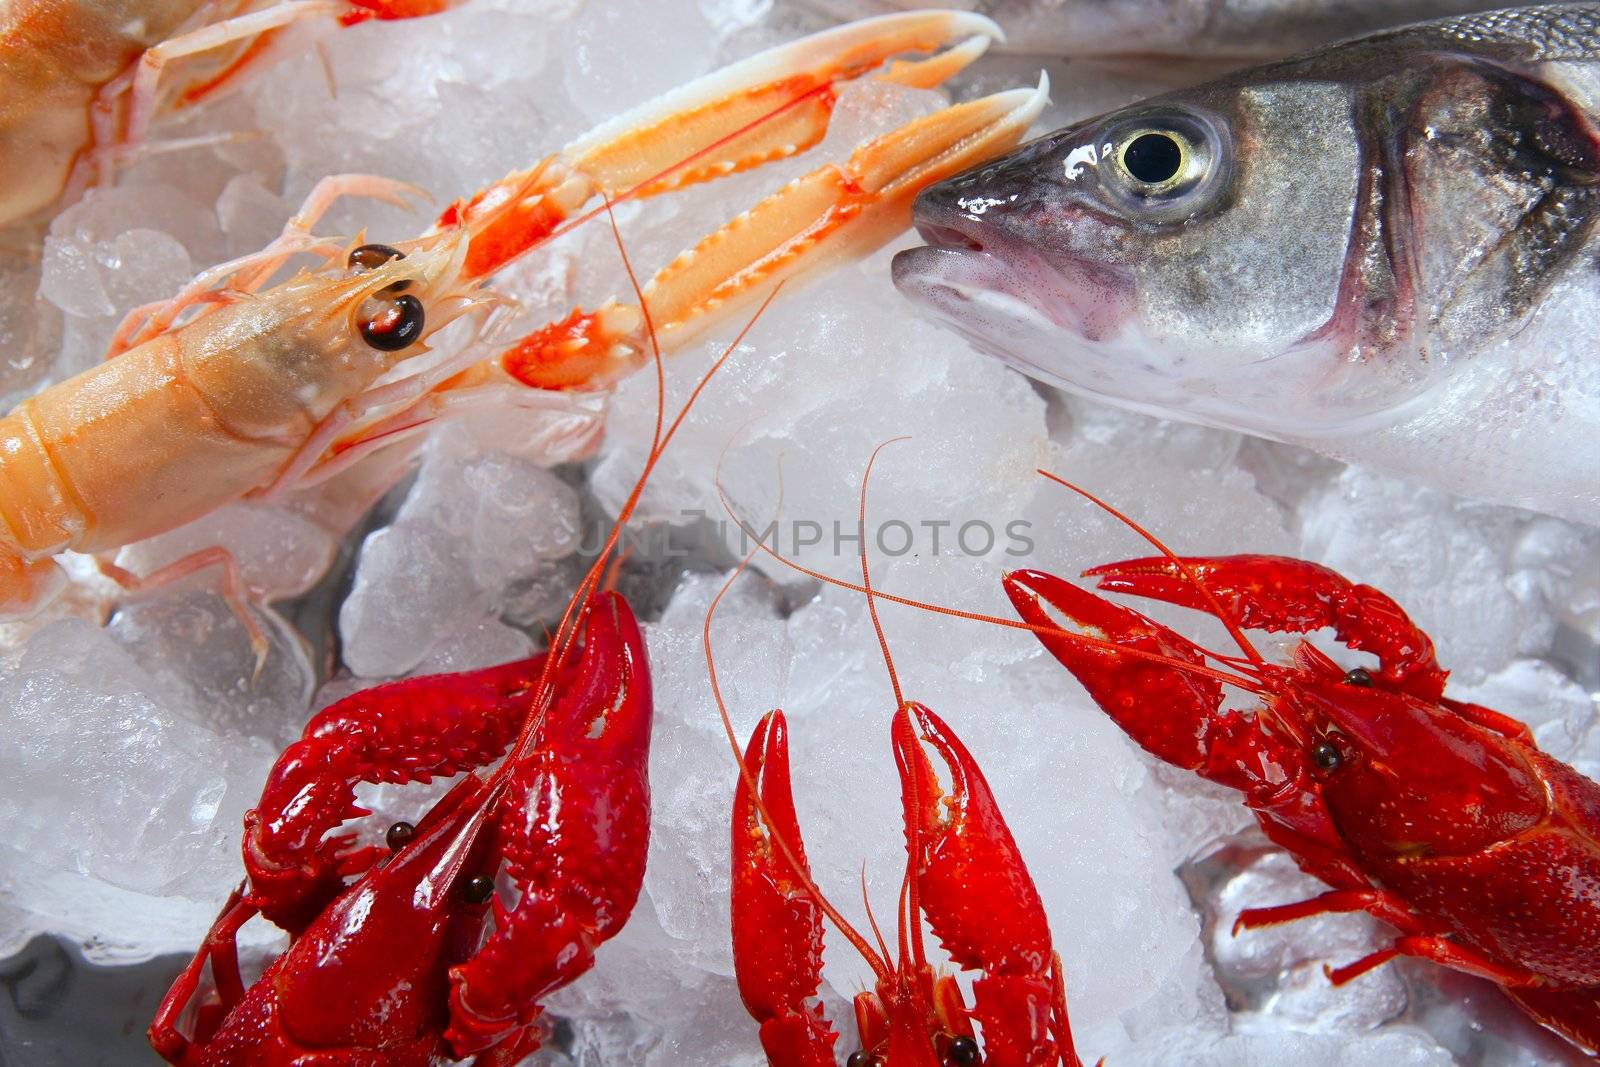 Seabass nephrops, river crabs and clams seafood over ice